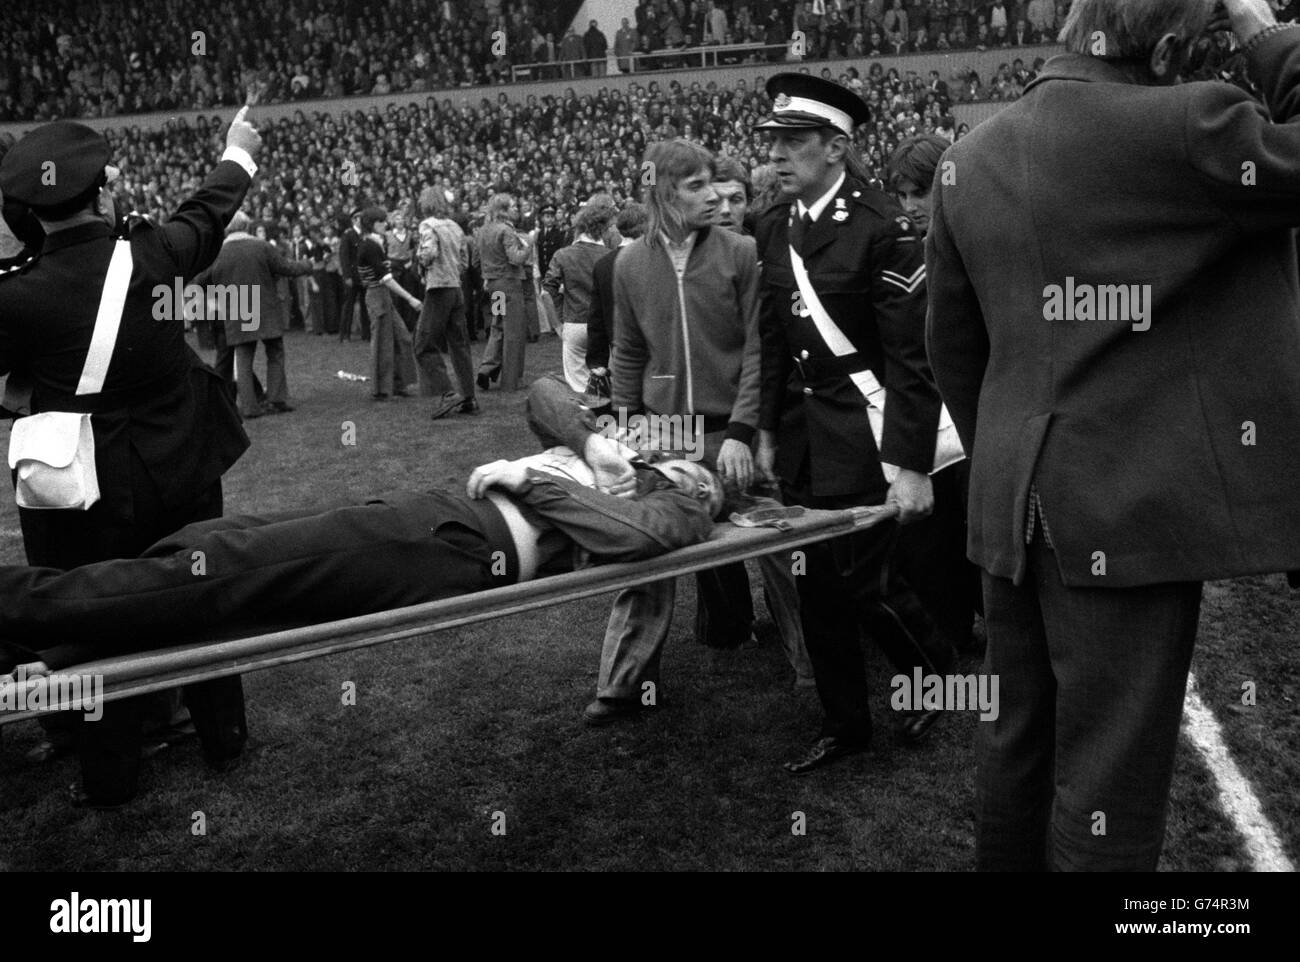 Ambulancemen are busy among the fans on the field at Upton Park, London, as fighting on the terraces and invasion of the pitch by spectators halted play for 19 minutes during West Ham's match against Manchester United. Stock Photo